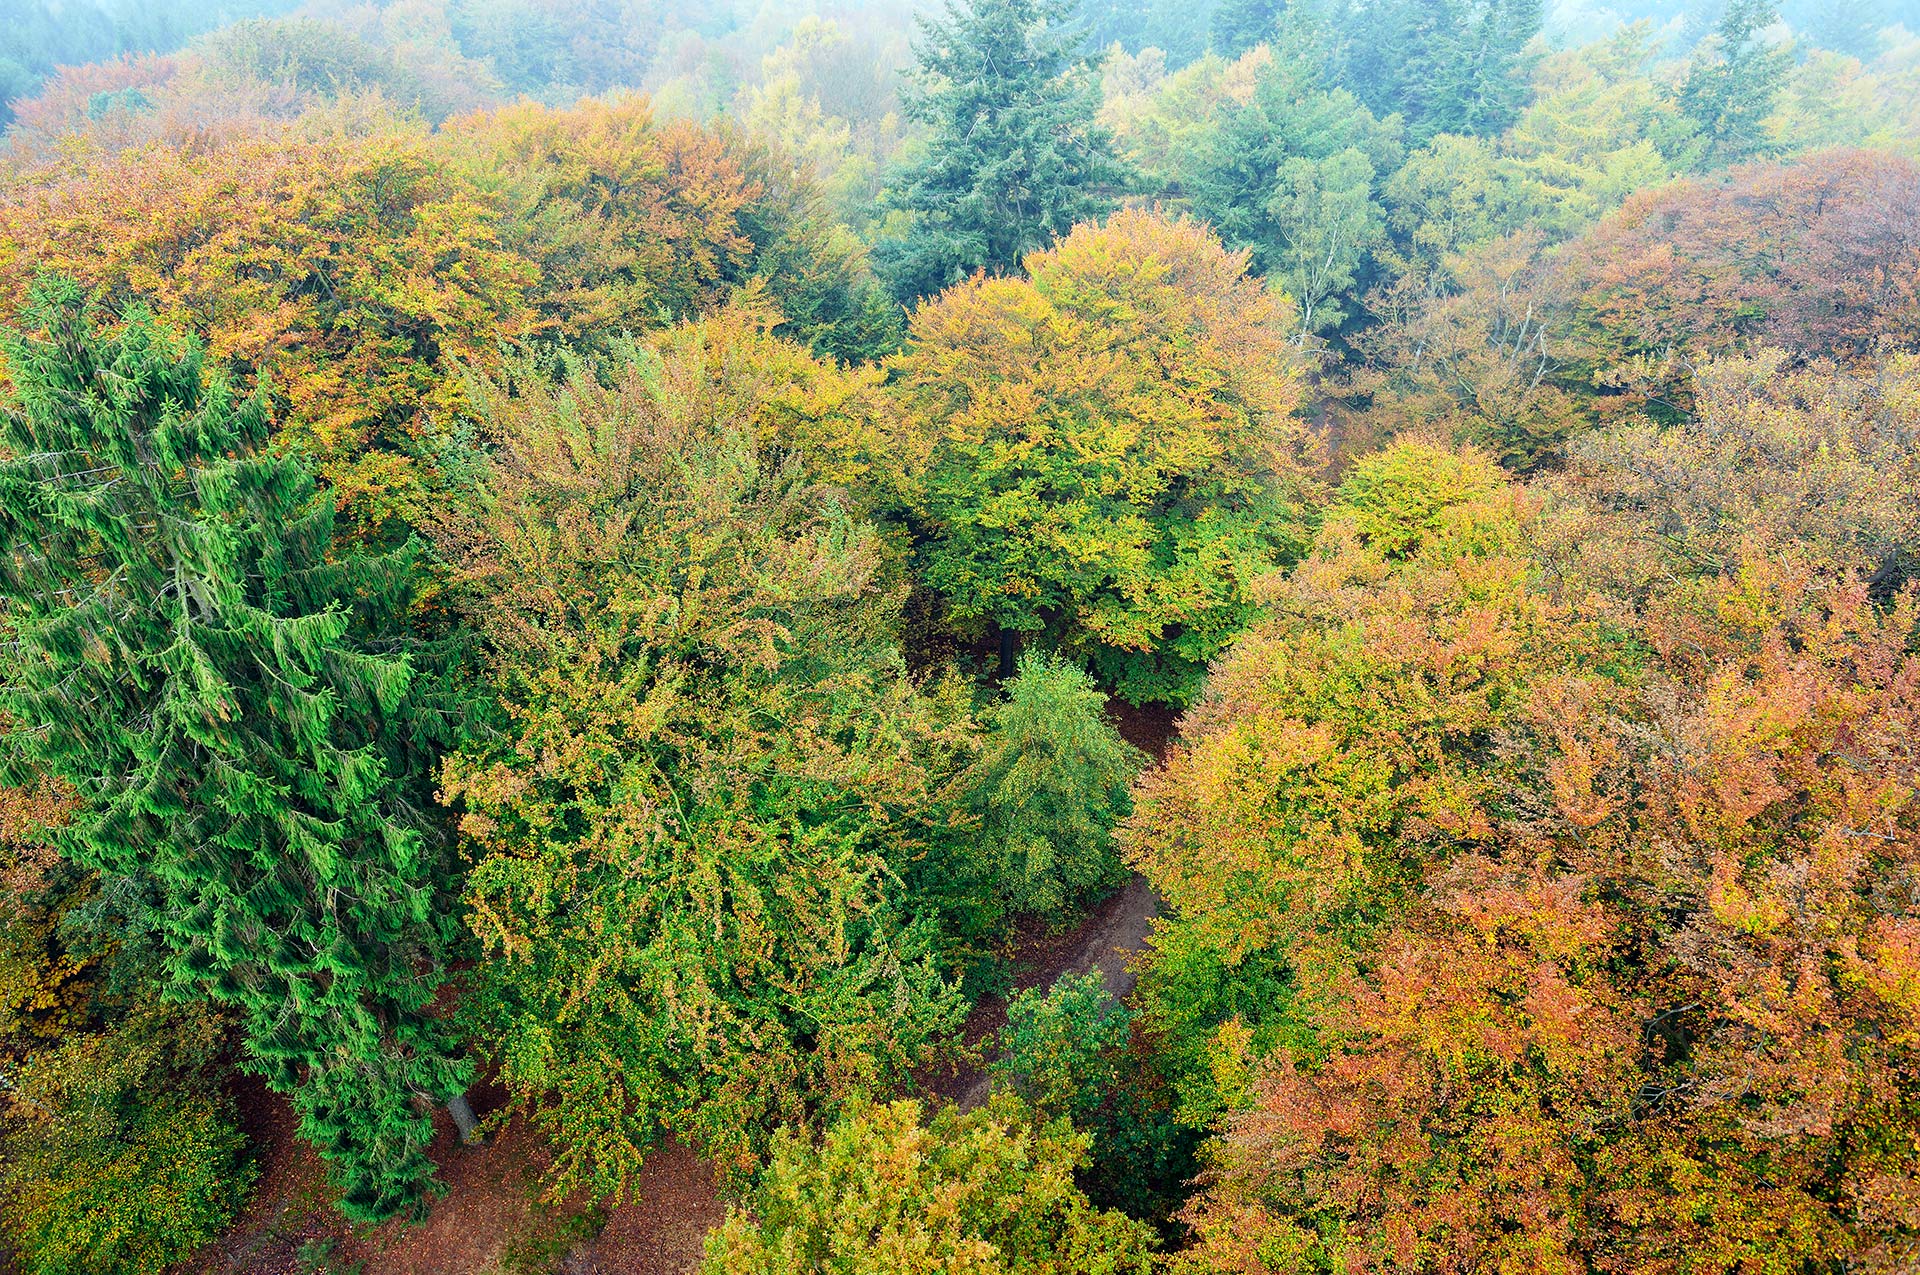 View on the canopy of the trees from out of the watch tower